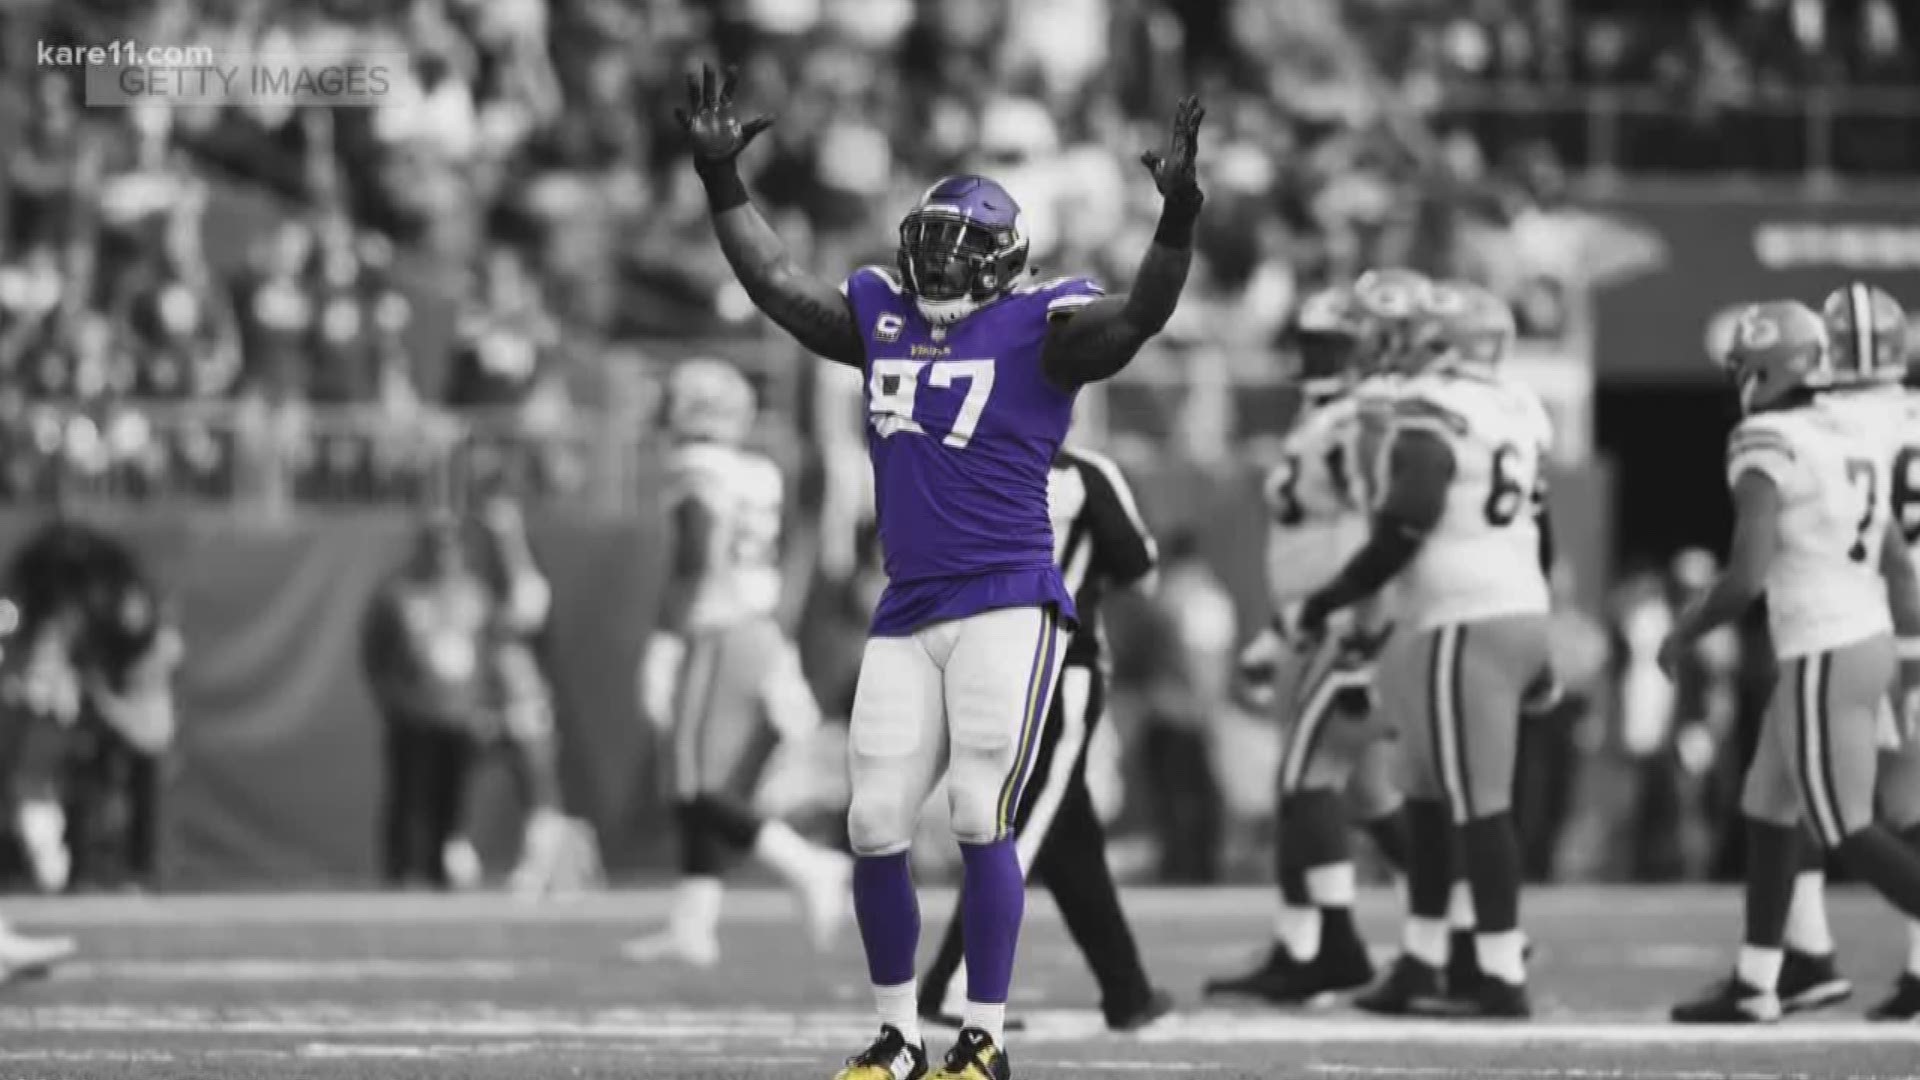 A report from police in Minnetrista shines light on the recent struggles of Vikings defensive end Everson Griffen, and the growing concerns of those who care about him. KARE 11's Cory Hepola reports on the support pouring in. https://kare11.tv/2QYlnl9